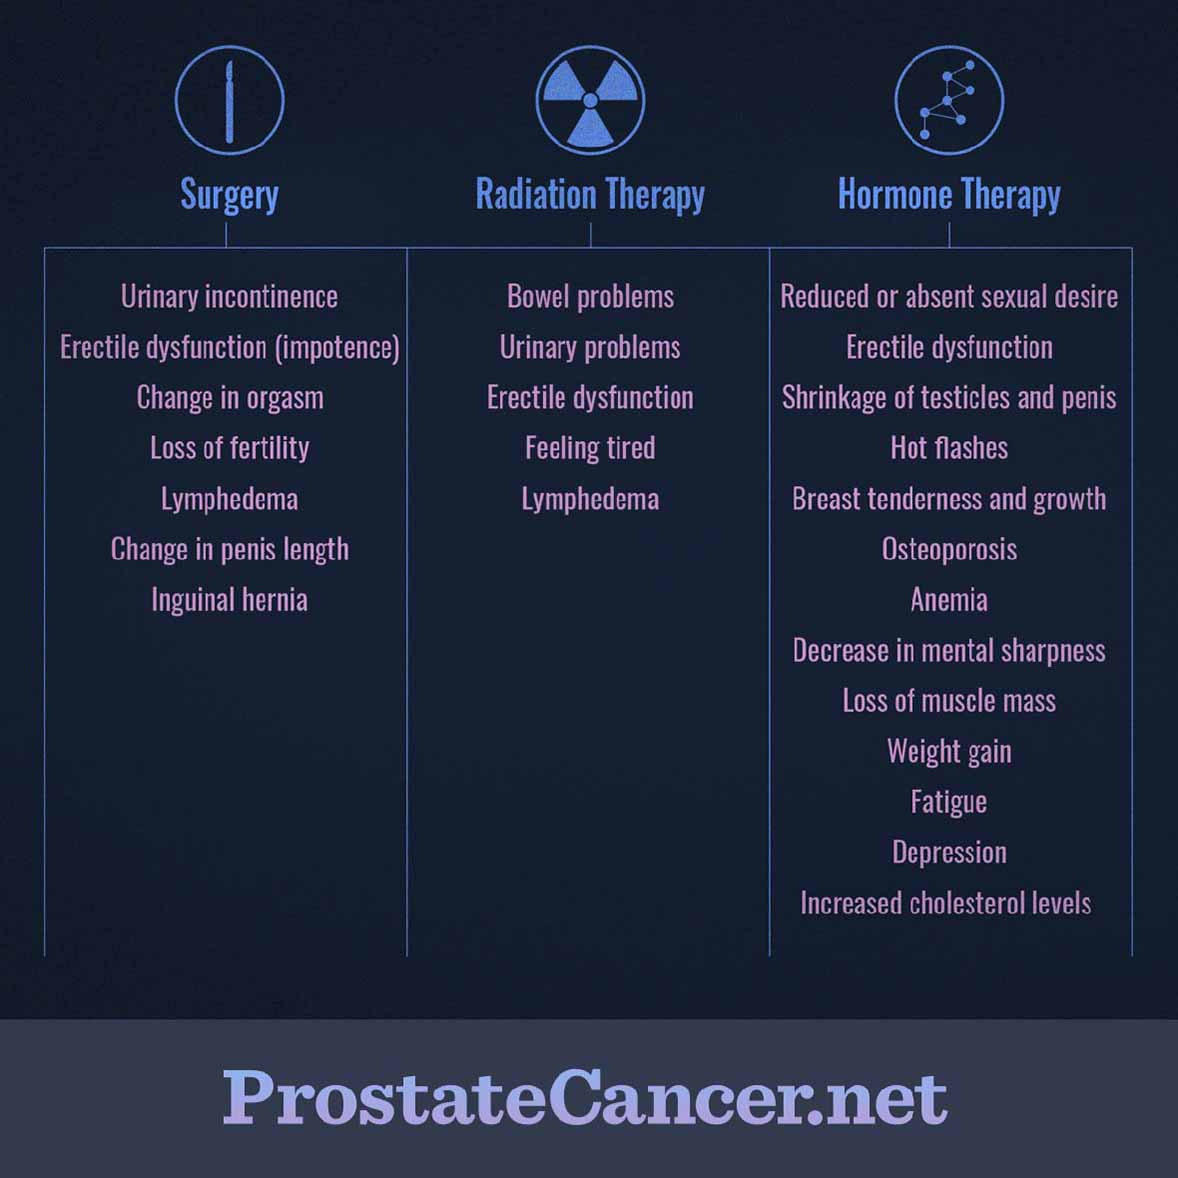 Radiation Therapy For Prostate Cancer And Erectile Dysfunction